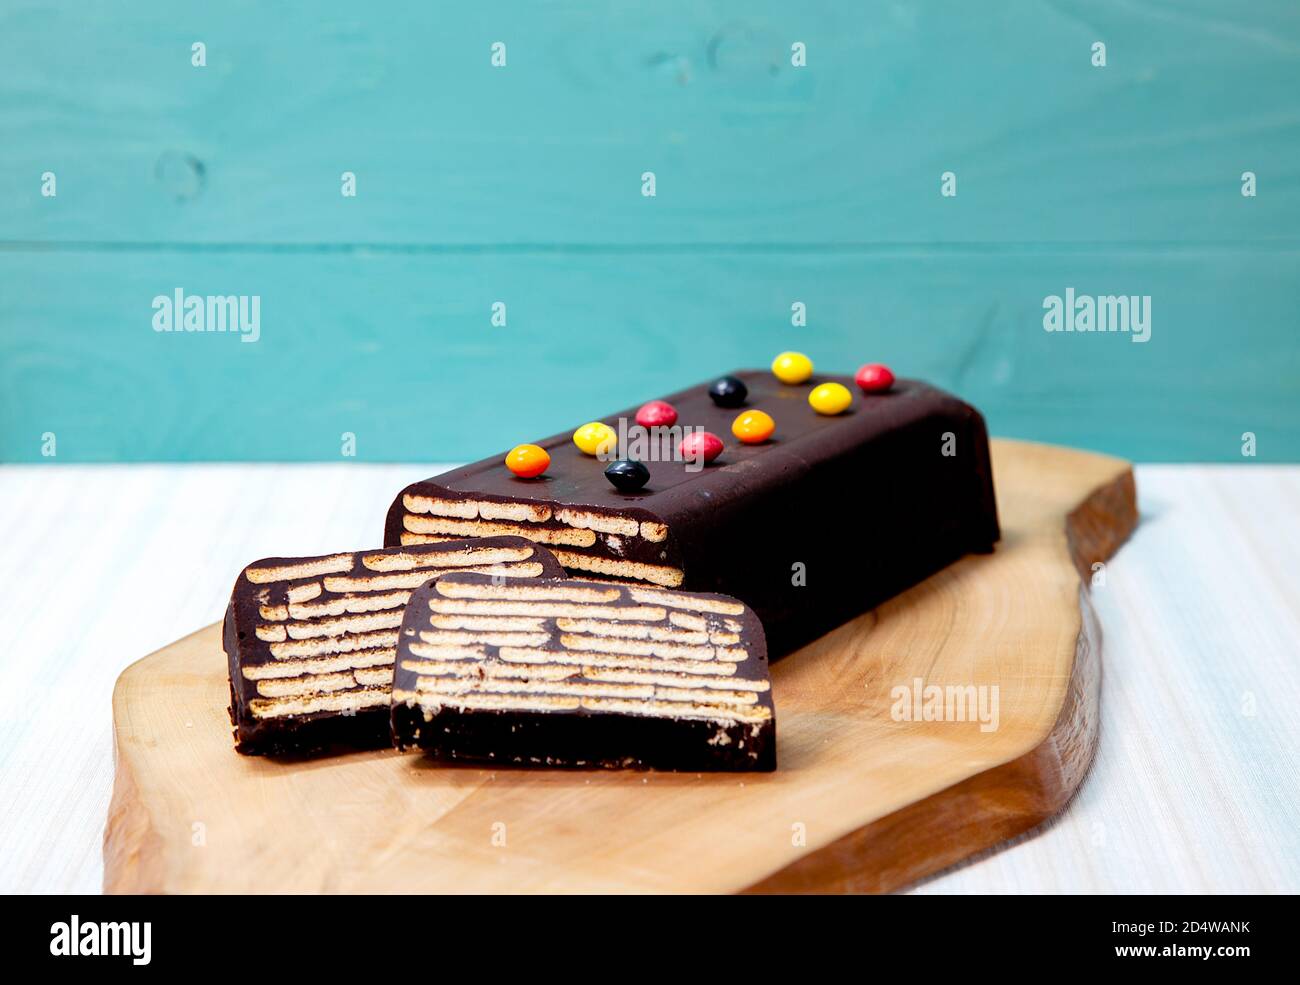 Dog Cake High Resolution Stock Photography and Images - Alamy